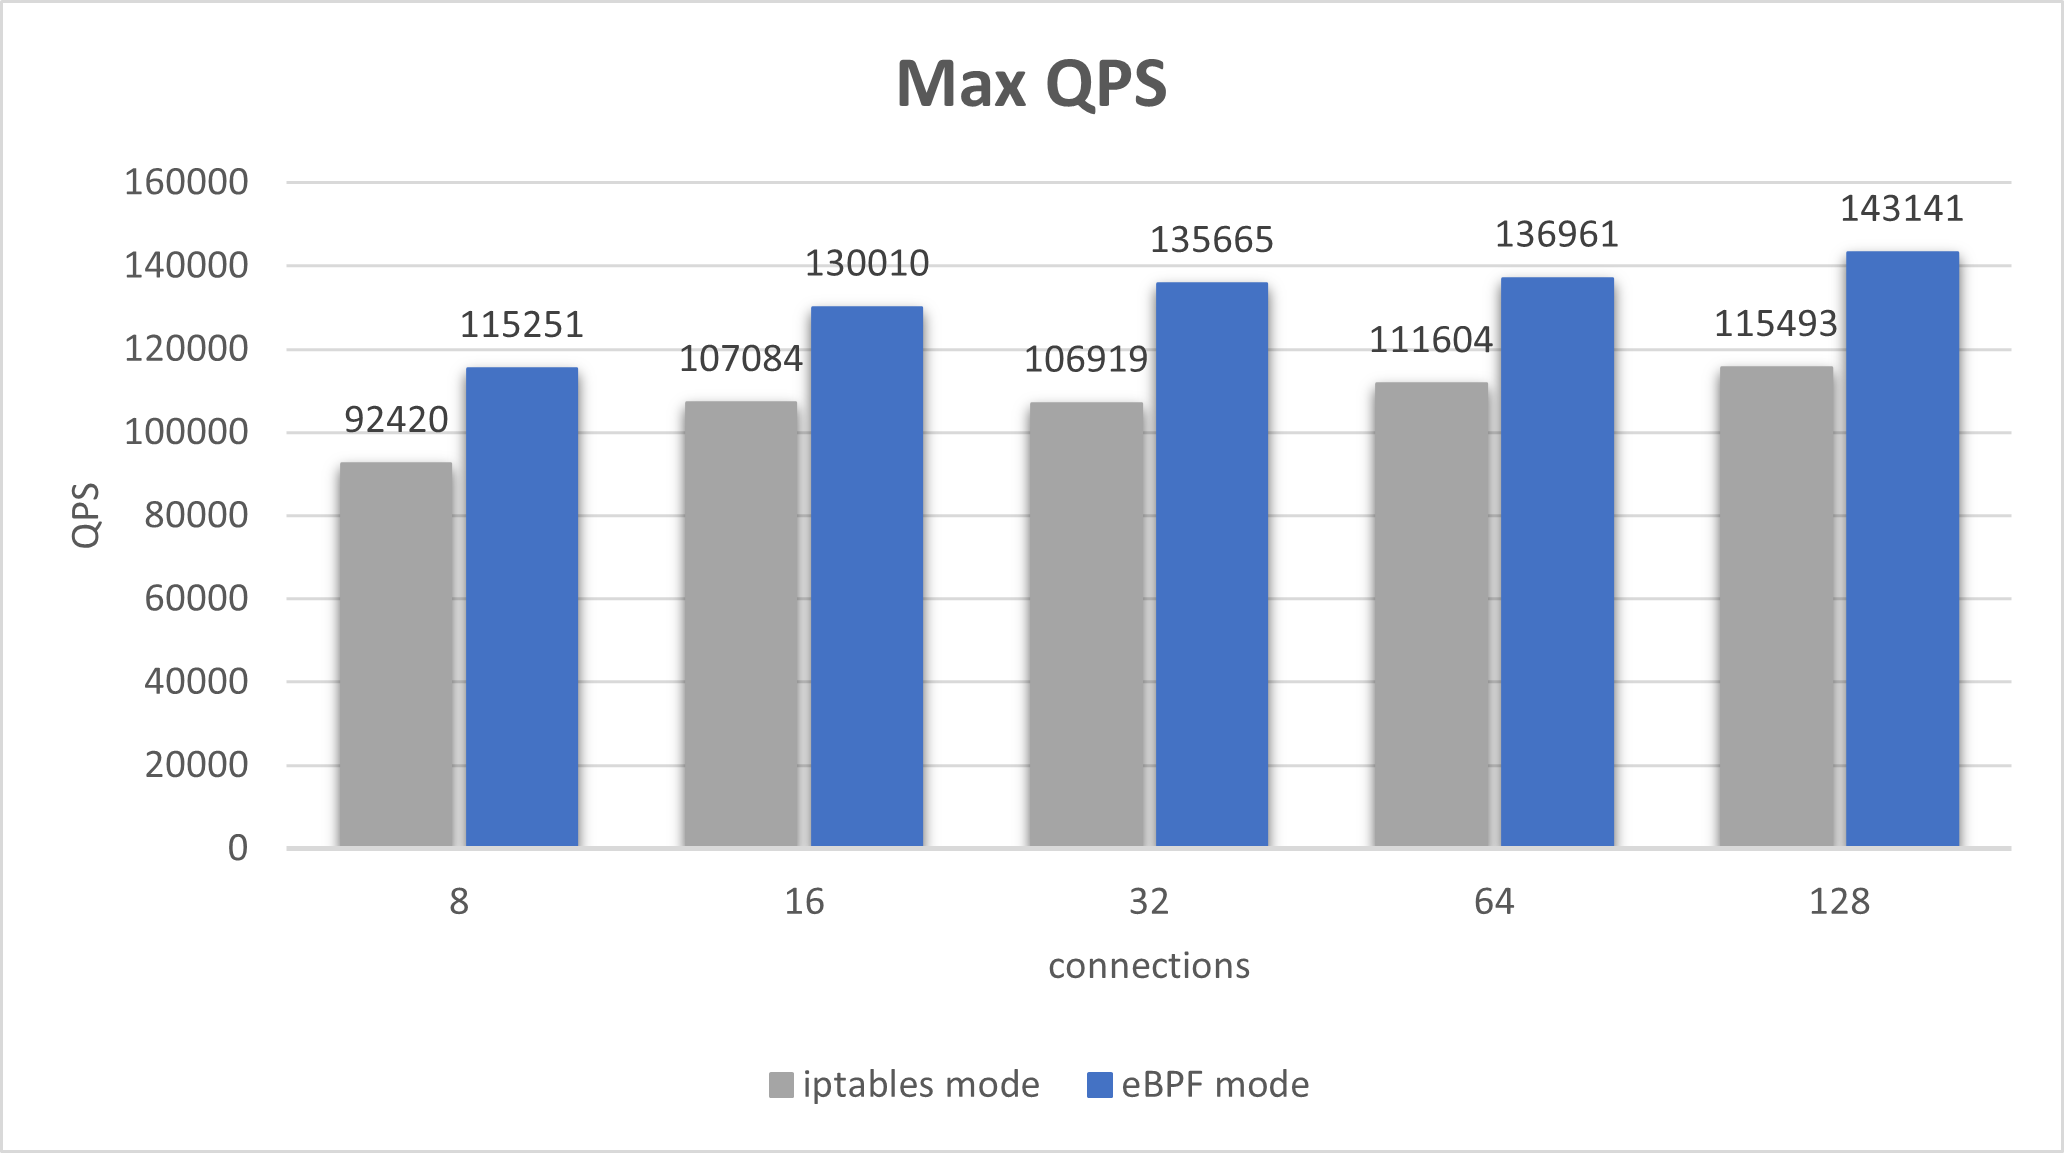 Max QPS with varying number of connections